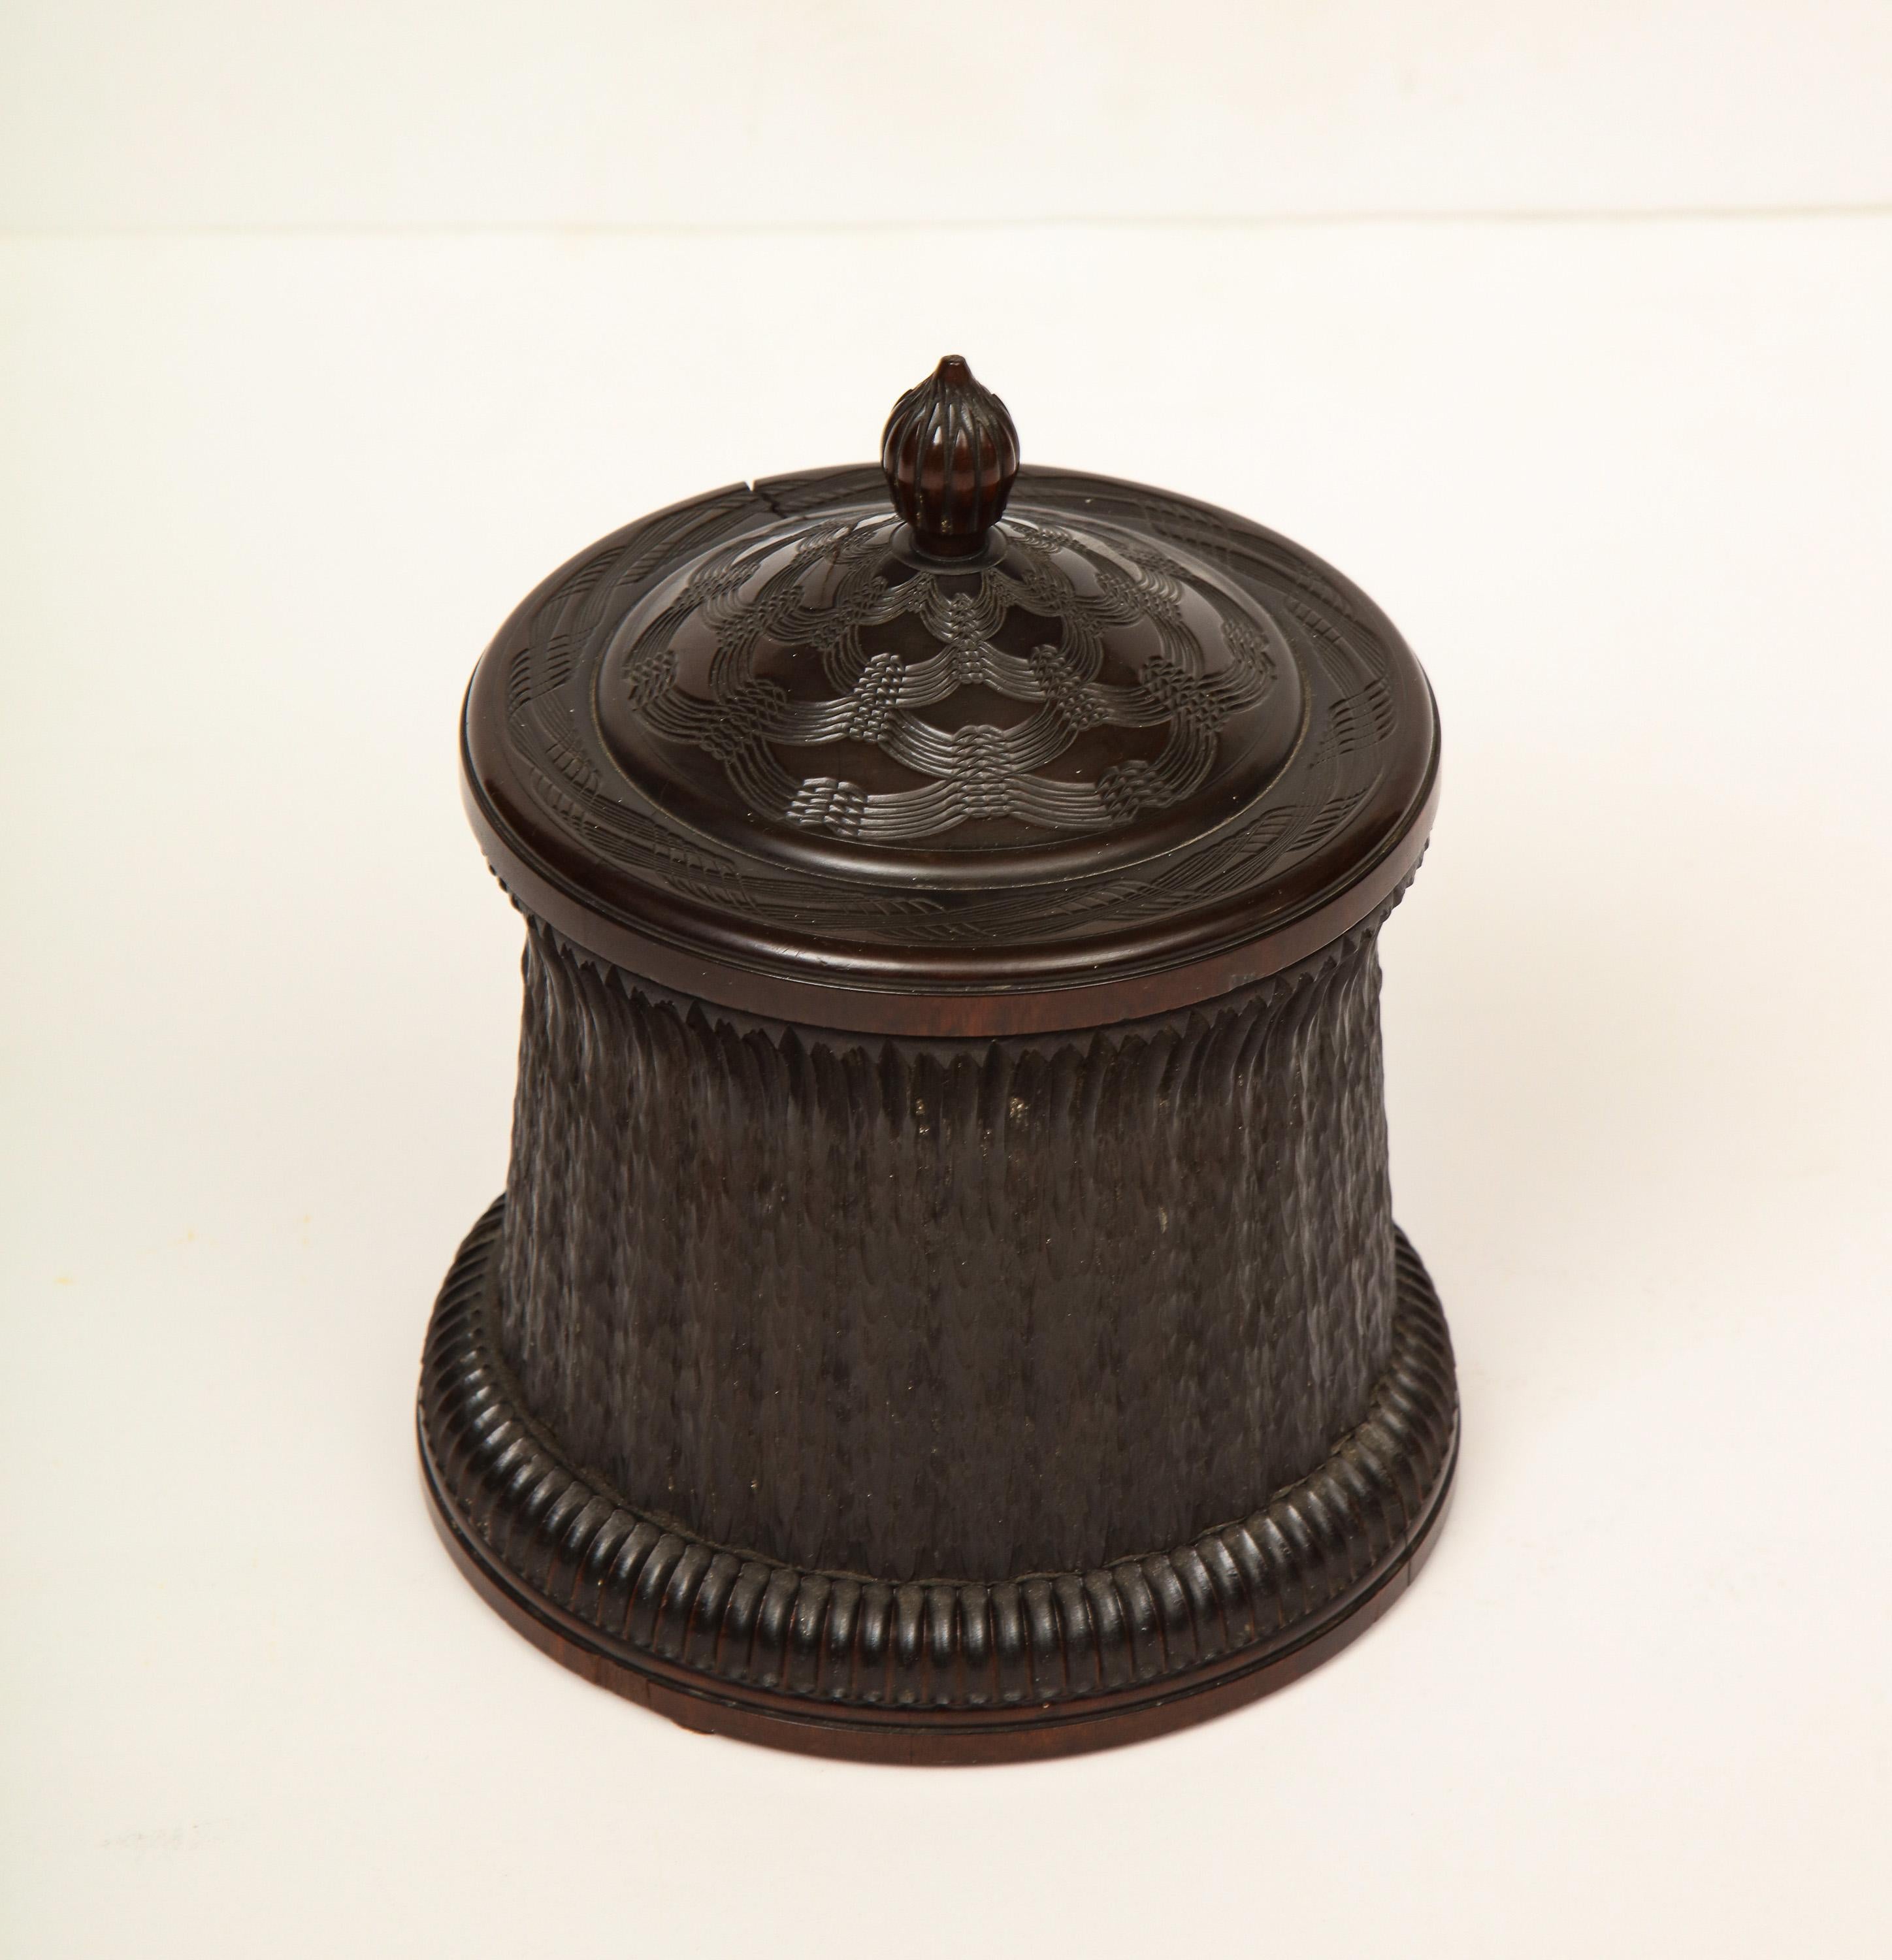 19th century, ebony, highly carved Anglo-Indian cylindrical box.